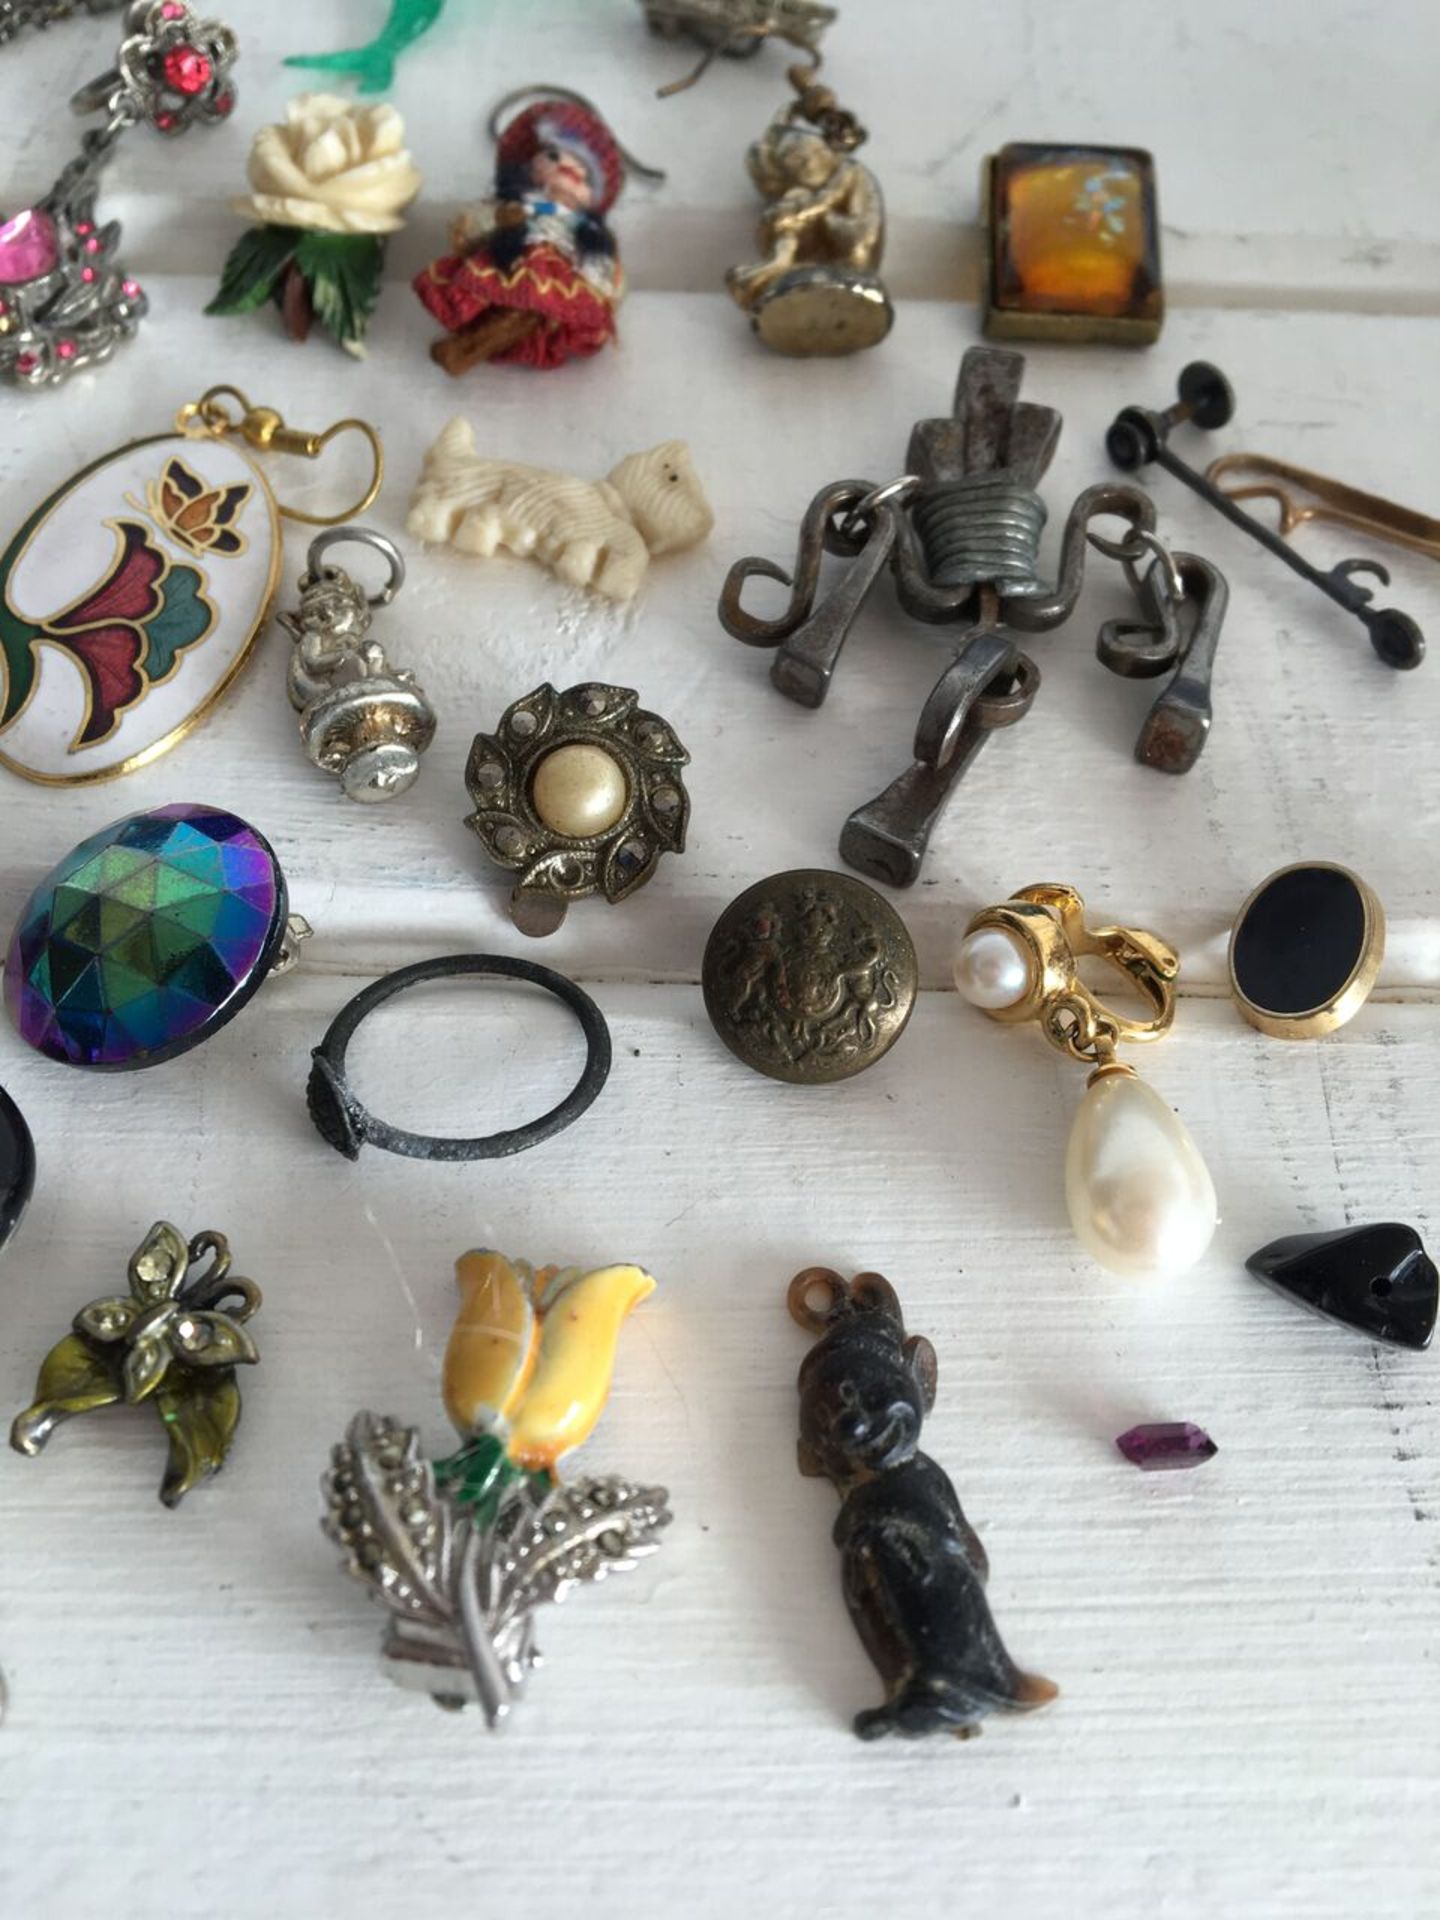 COLLECTION OF SMALL CHARMS, PENDANTS, BUTTONS AND OTHER VINTAGE CURIOS (APPROX 44 ITEMS IN TOTAL). - Image 4 of 5